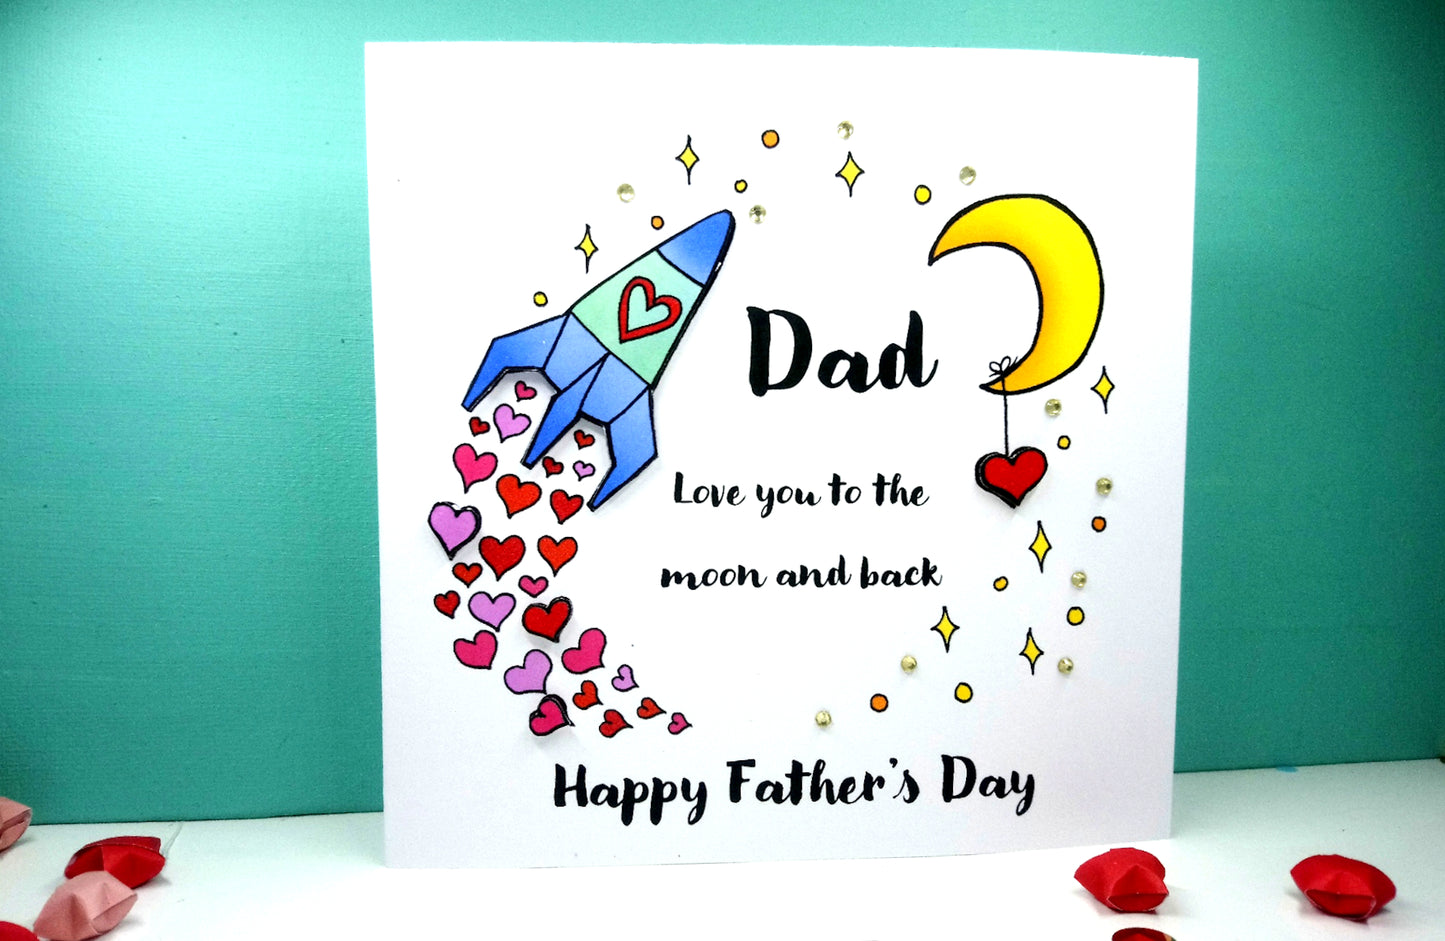 Dad Love you to the moon and back Fathers Day Card